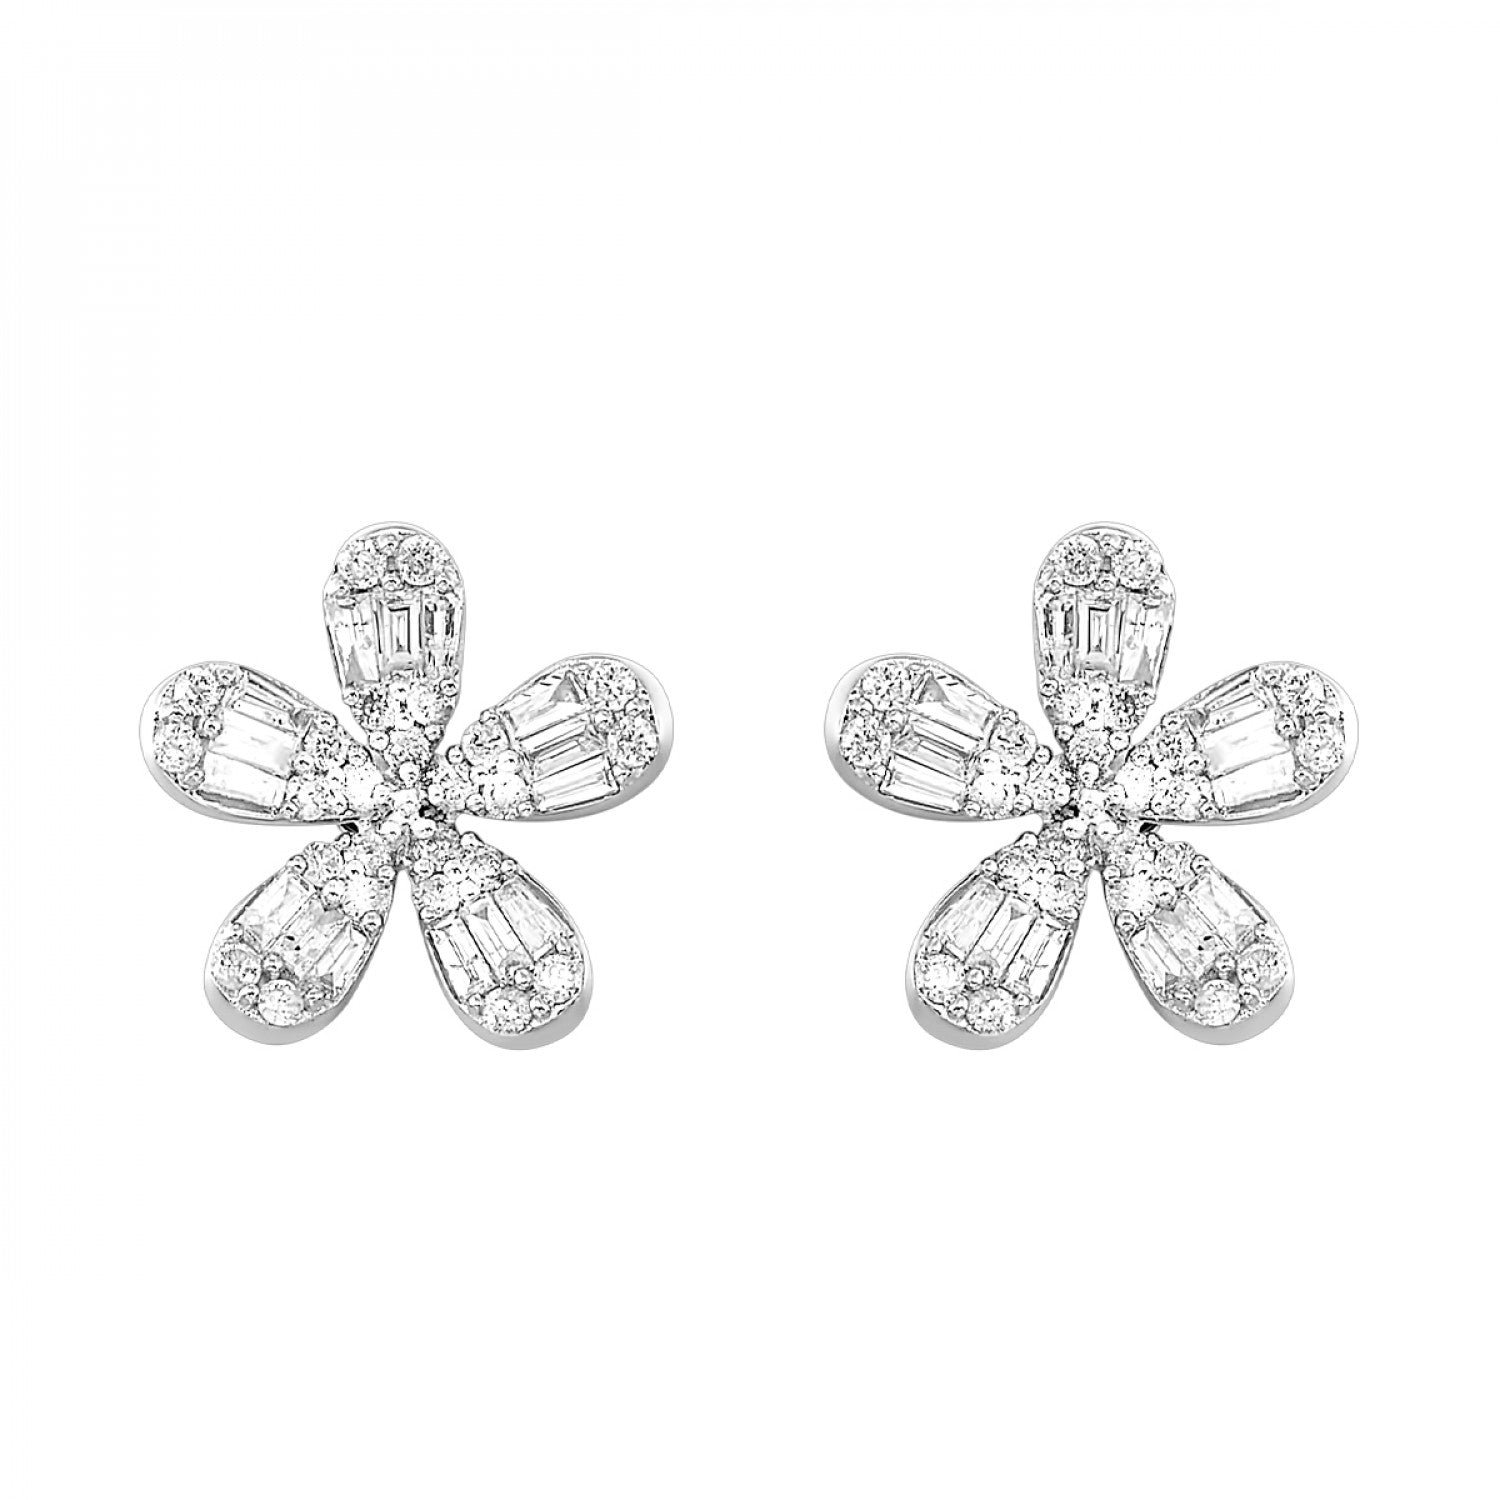 10K White Gold Flower Earrings with Baguette and Round Diamonds